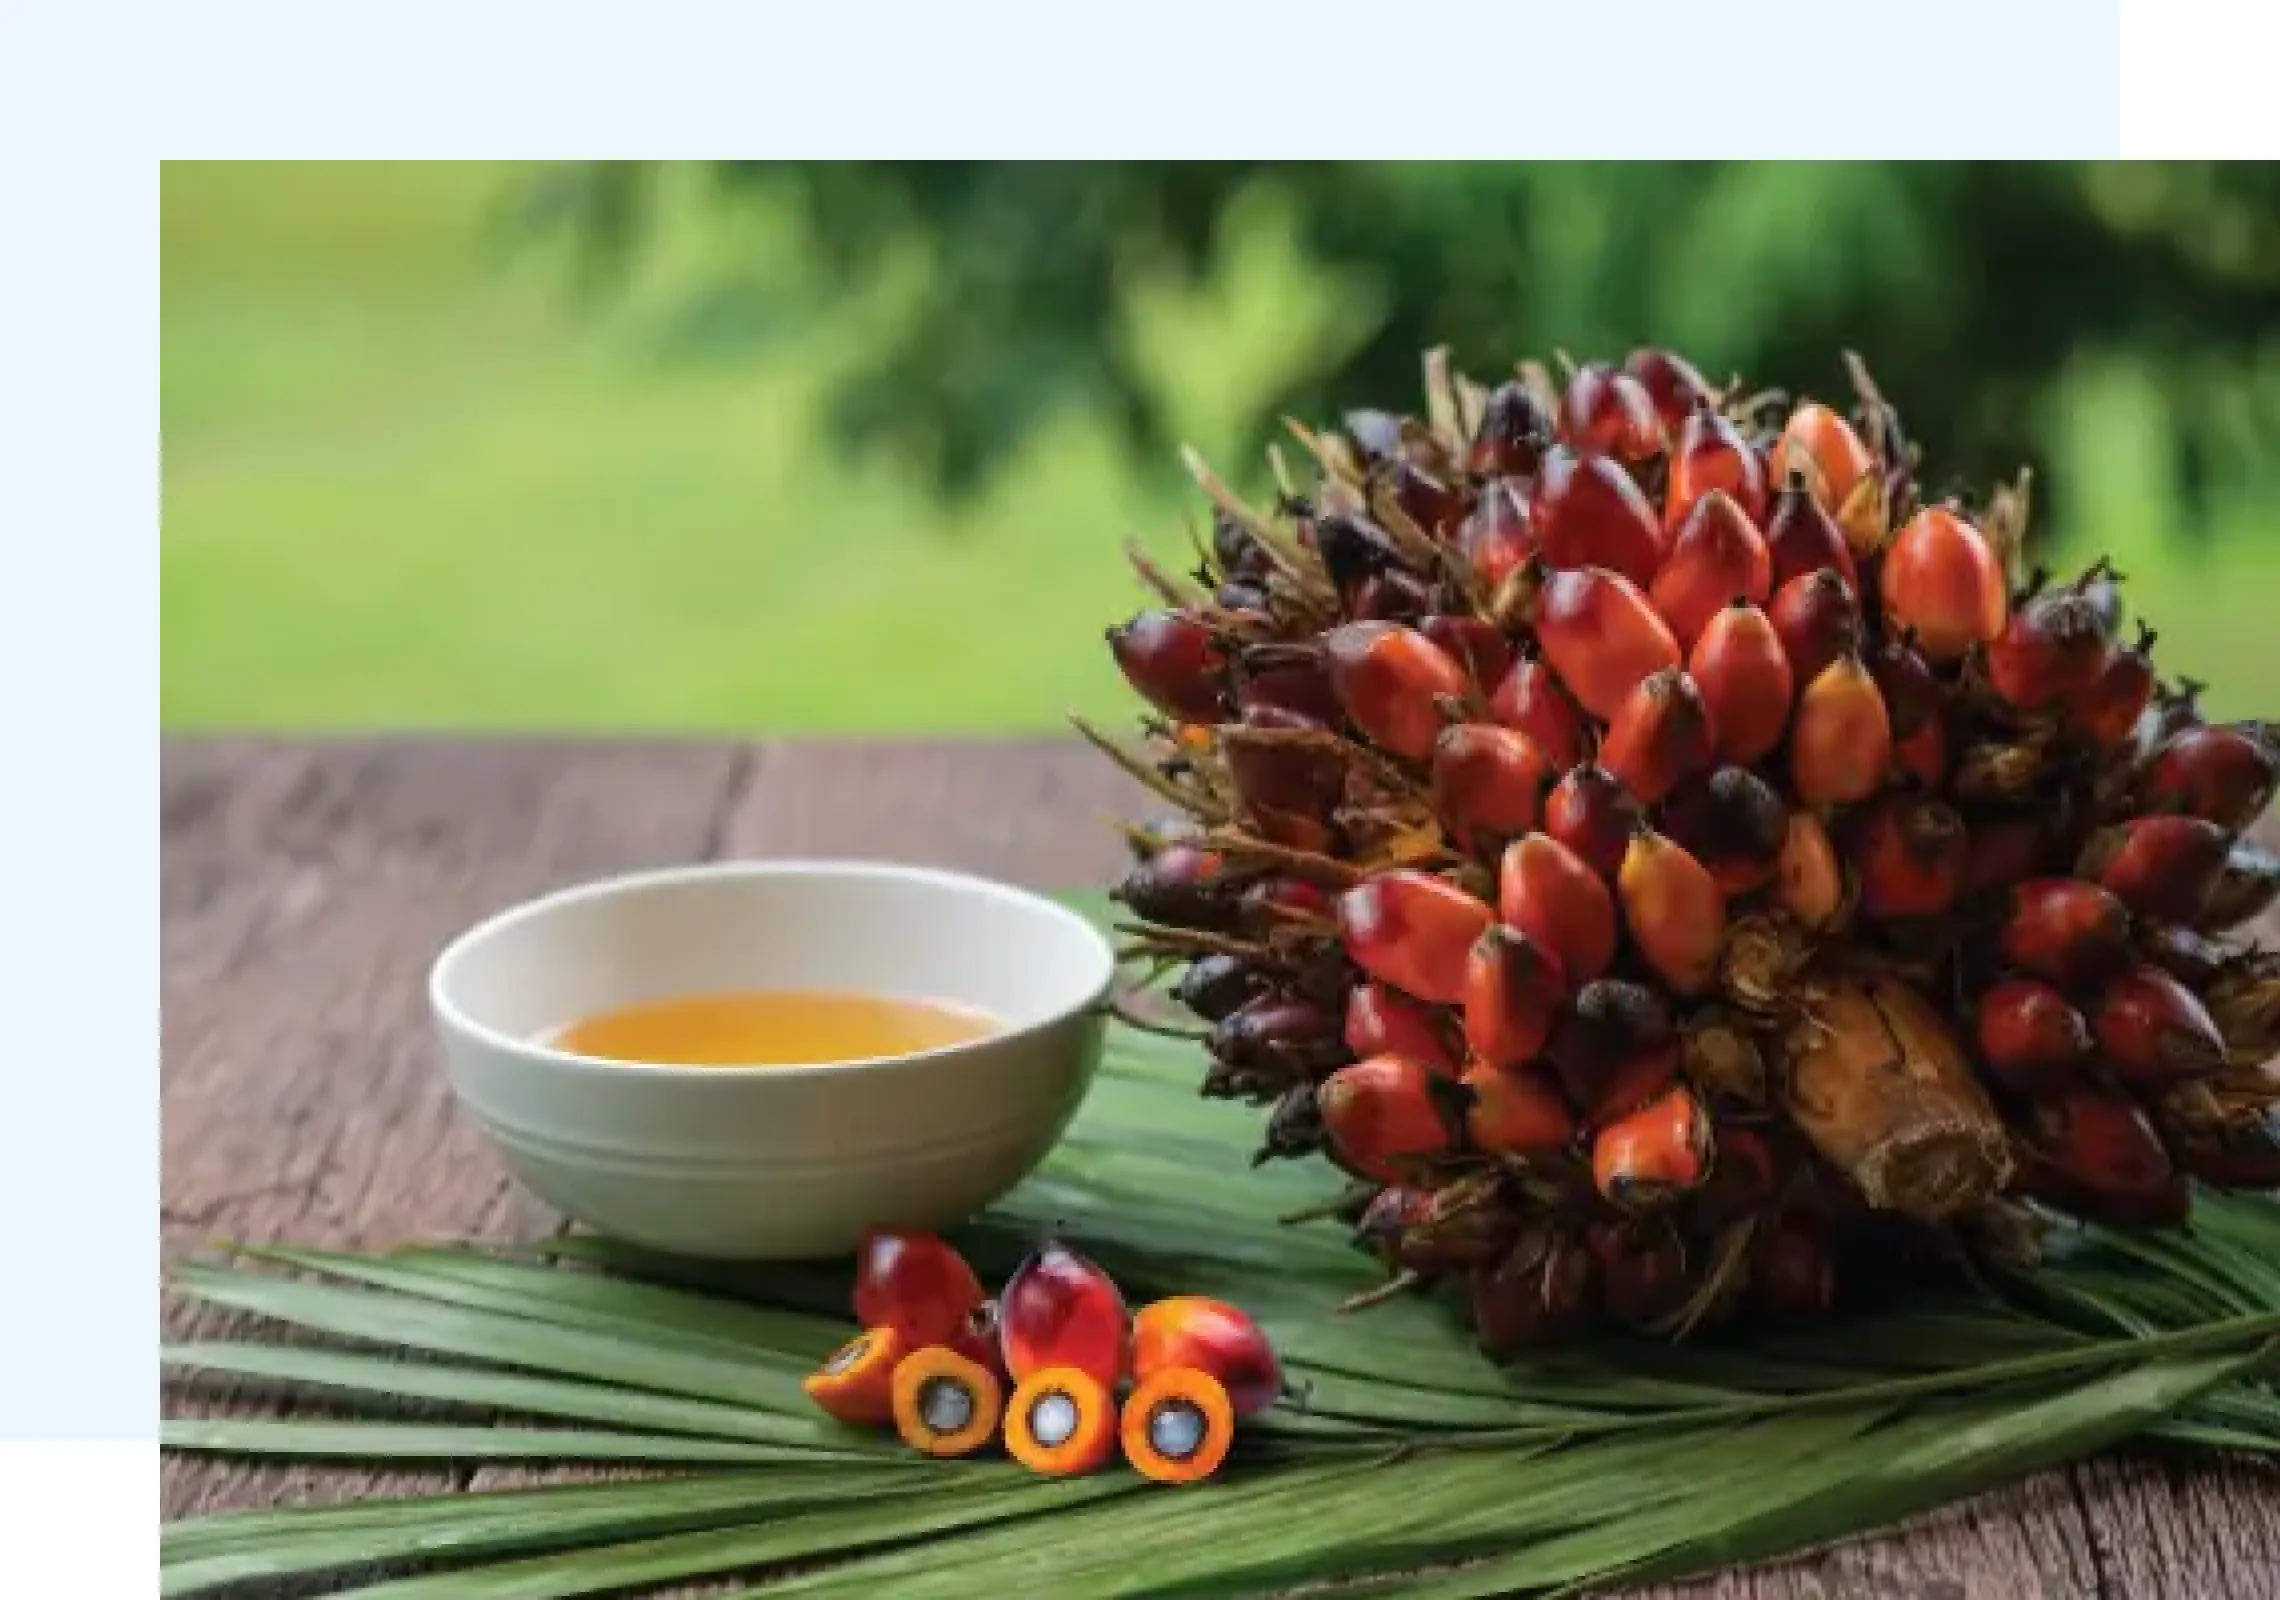 Palm Chemtradeasia